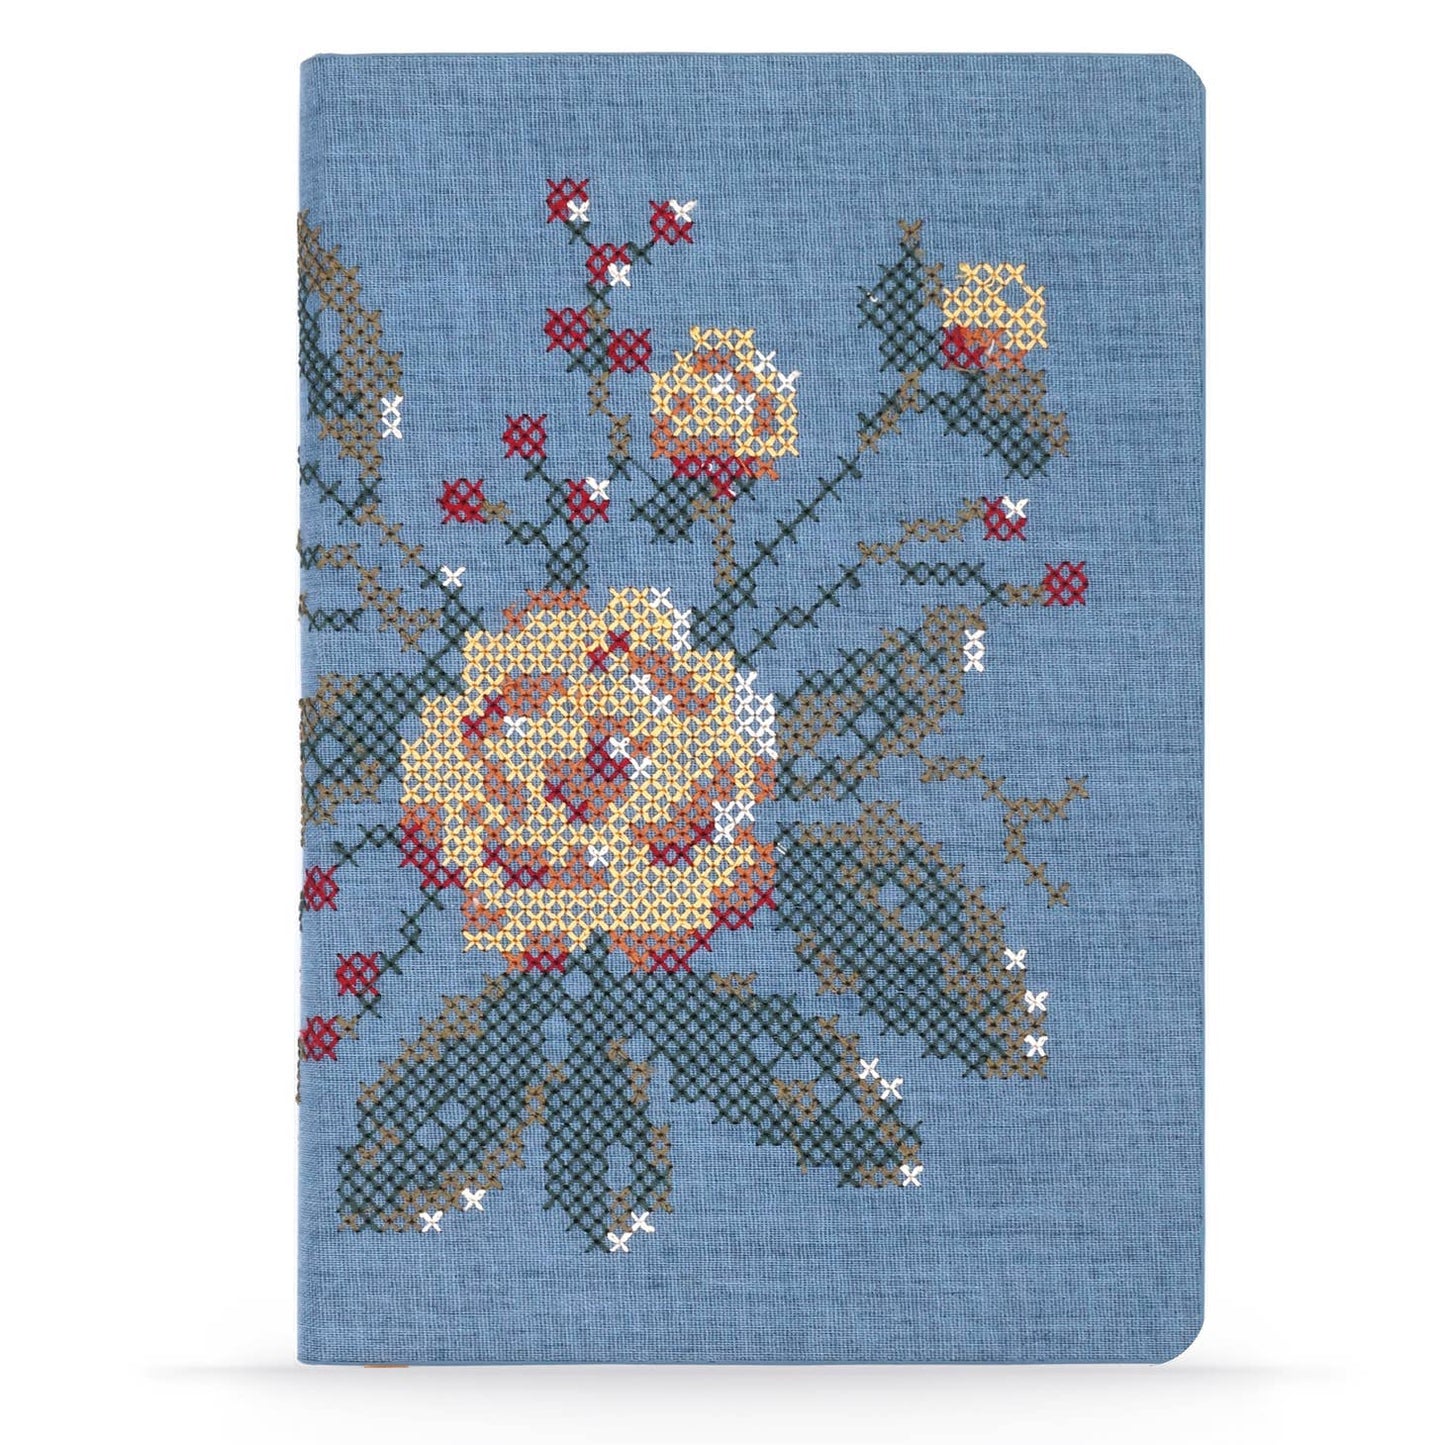 Cross Stitch Flowers Embroidered Journal Notebook